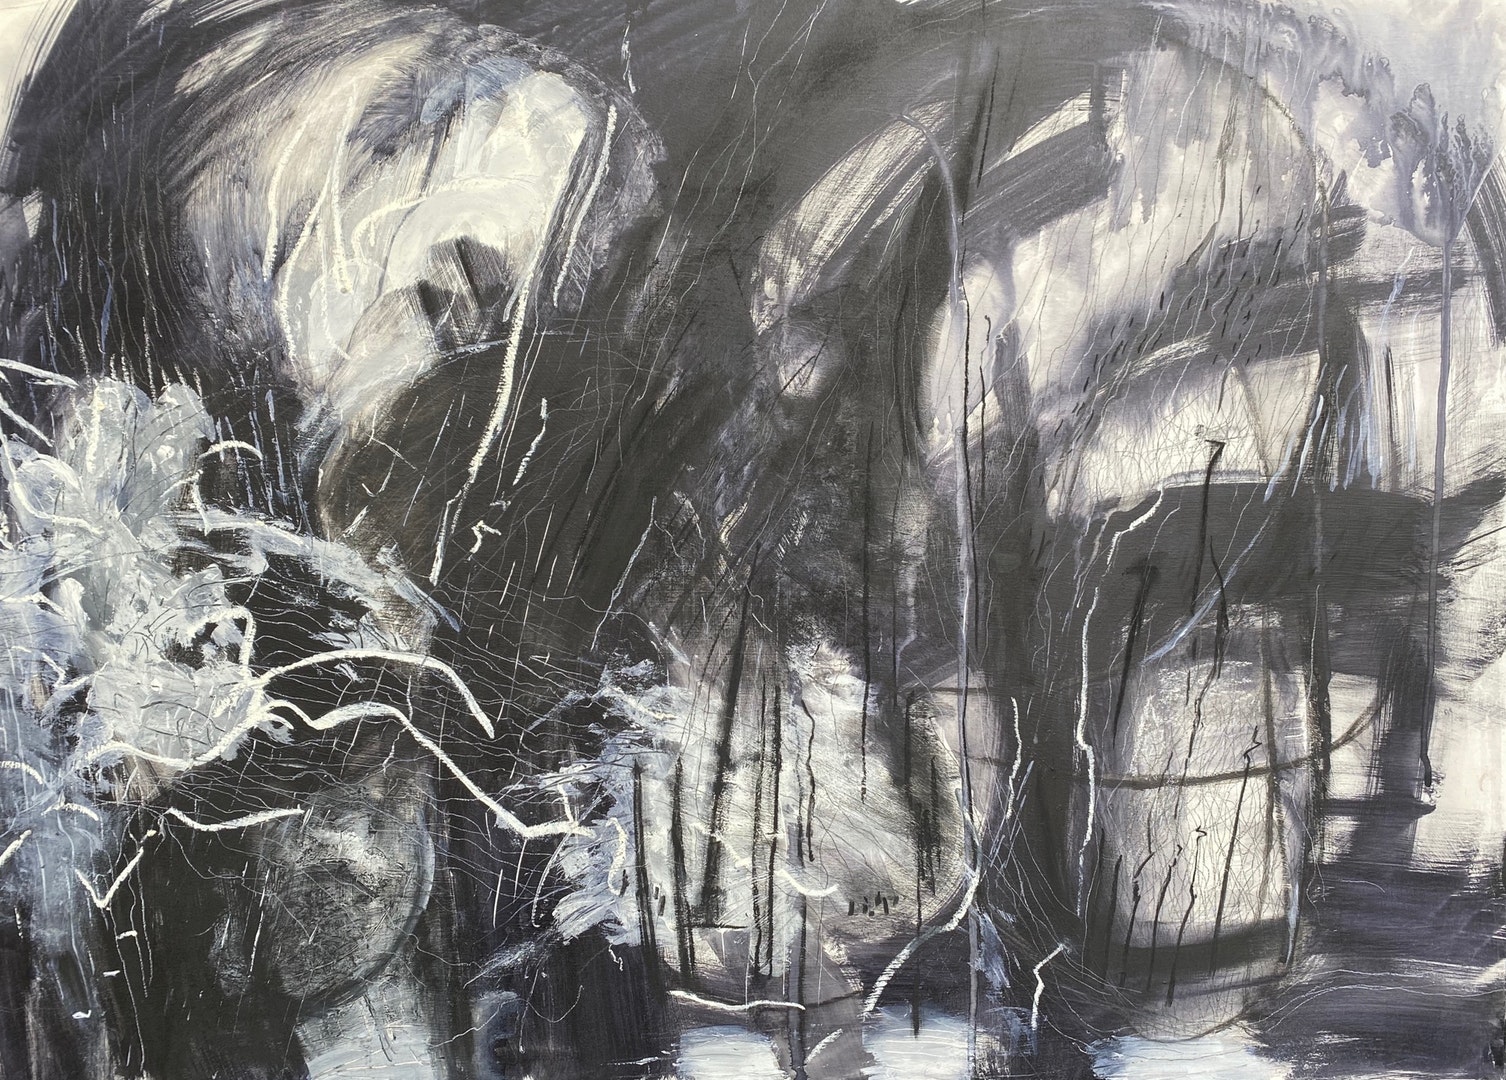 'Storm', Di Drummond, Mixed media on cradled board, 60 x 84 cm